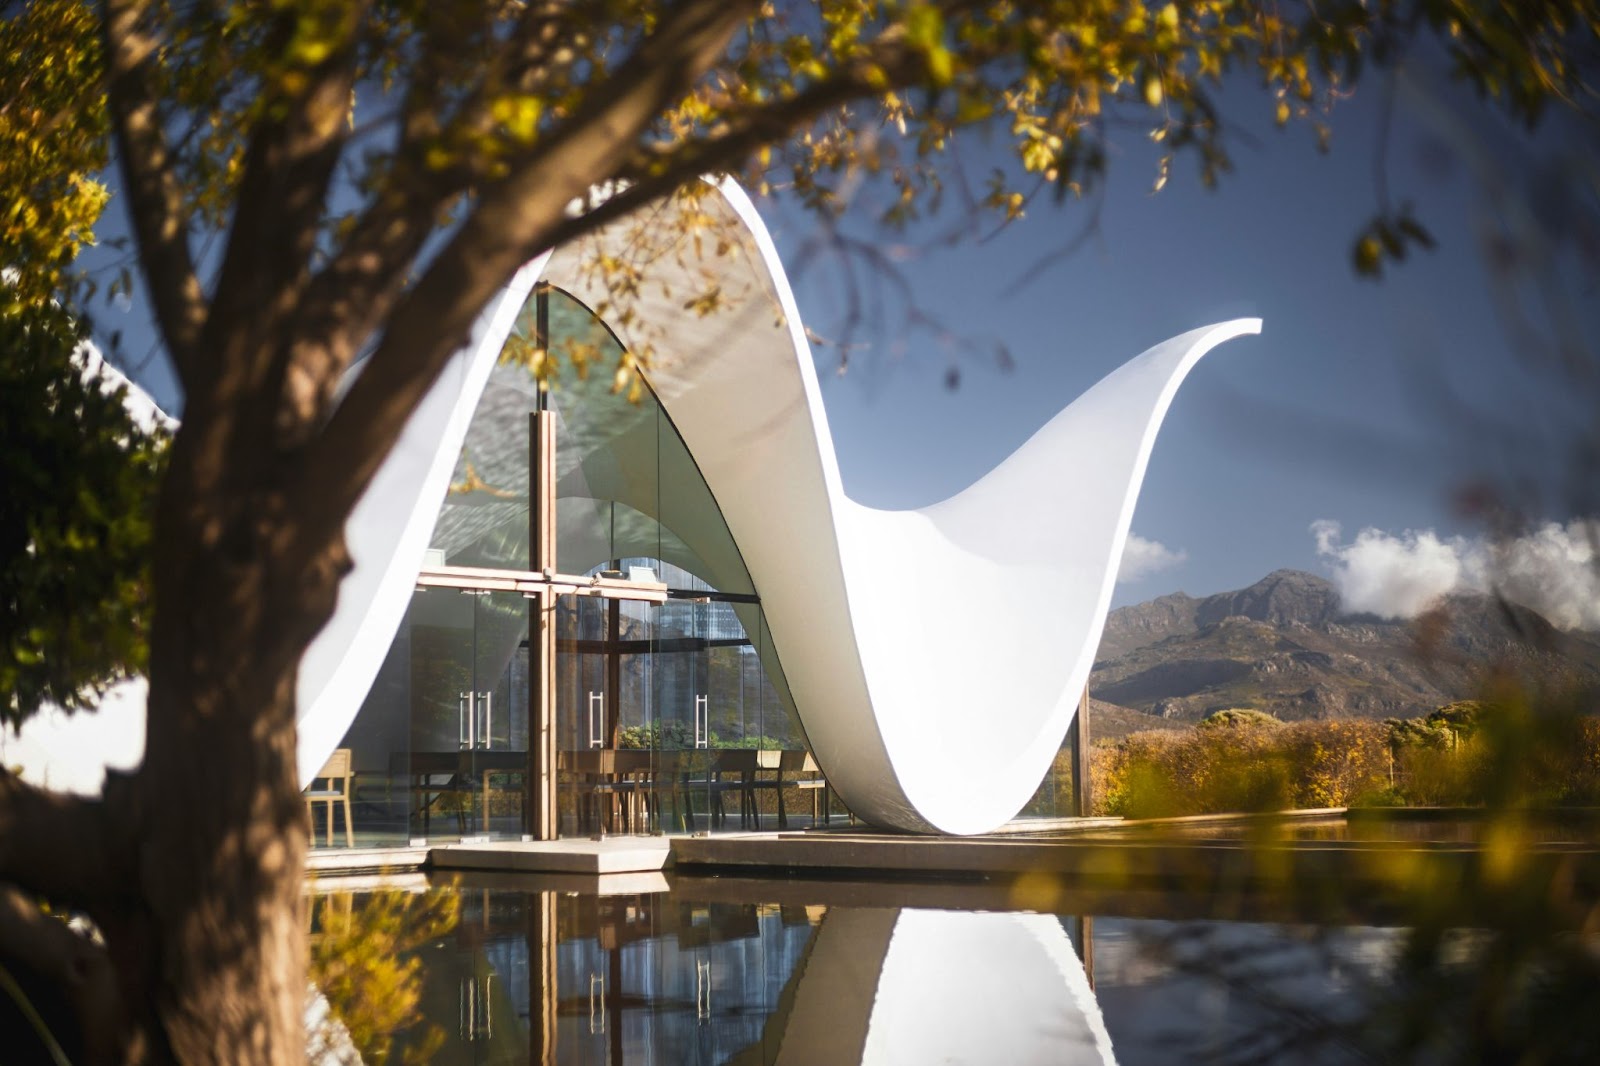 The iconic BOSJES situated on Mitchell's pass in Ceres, the Cape Winelands